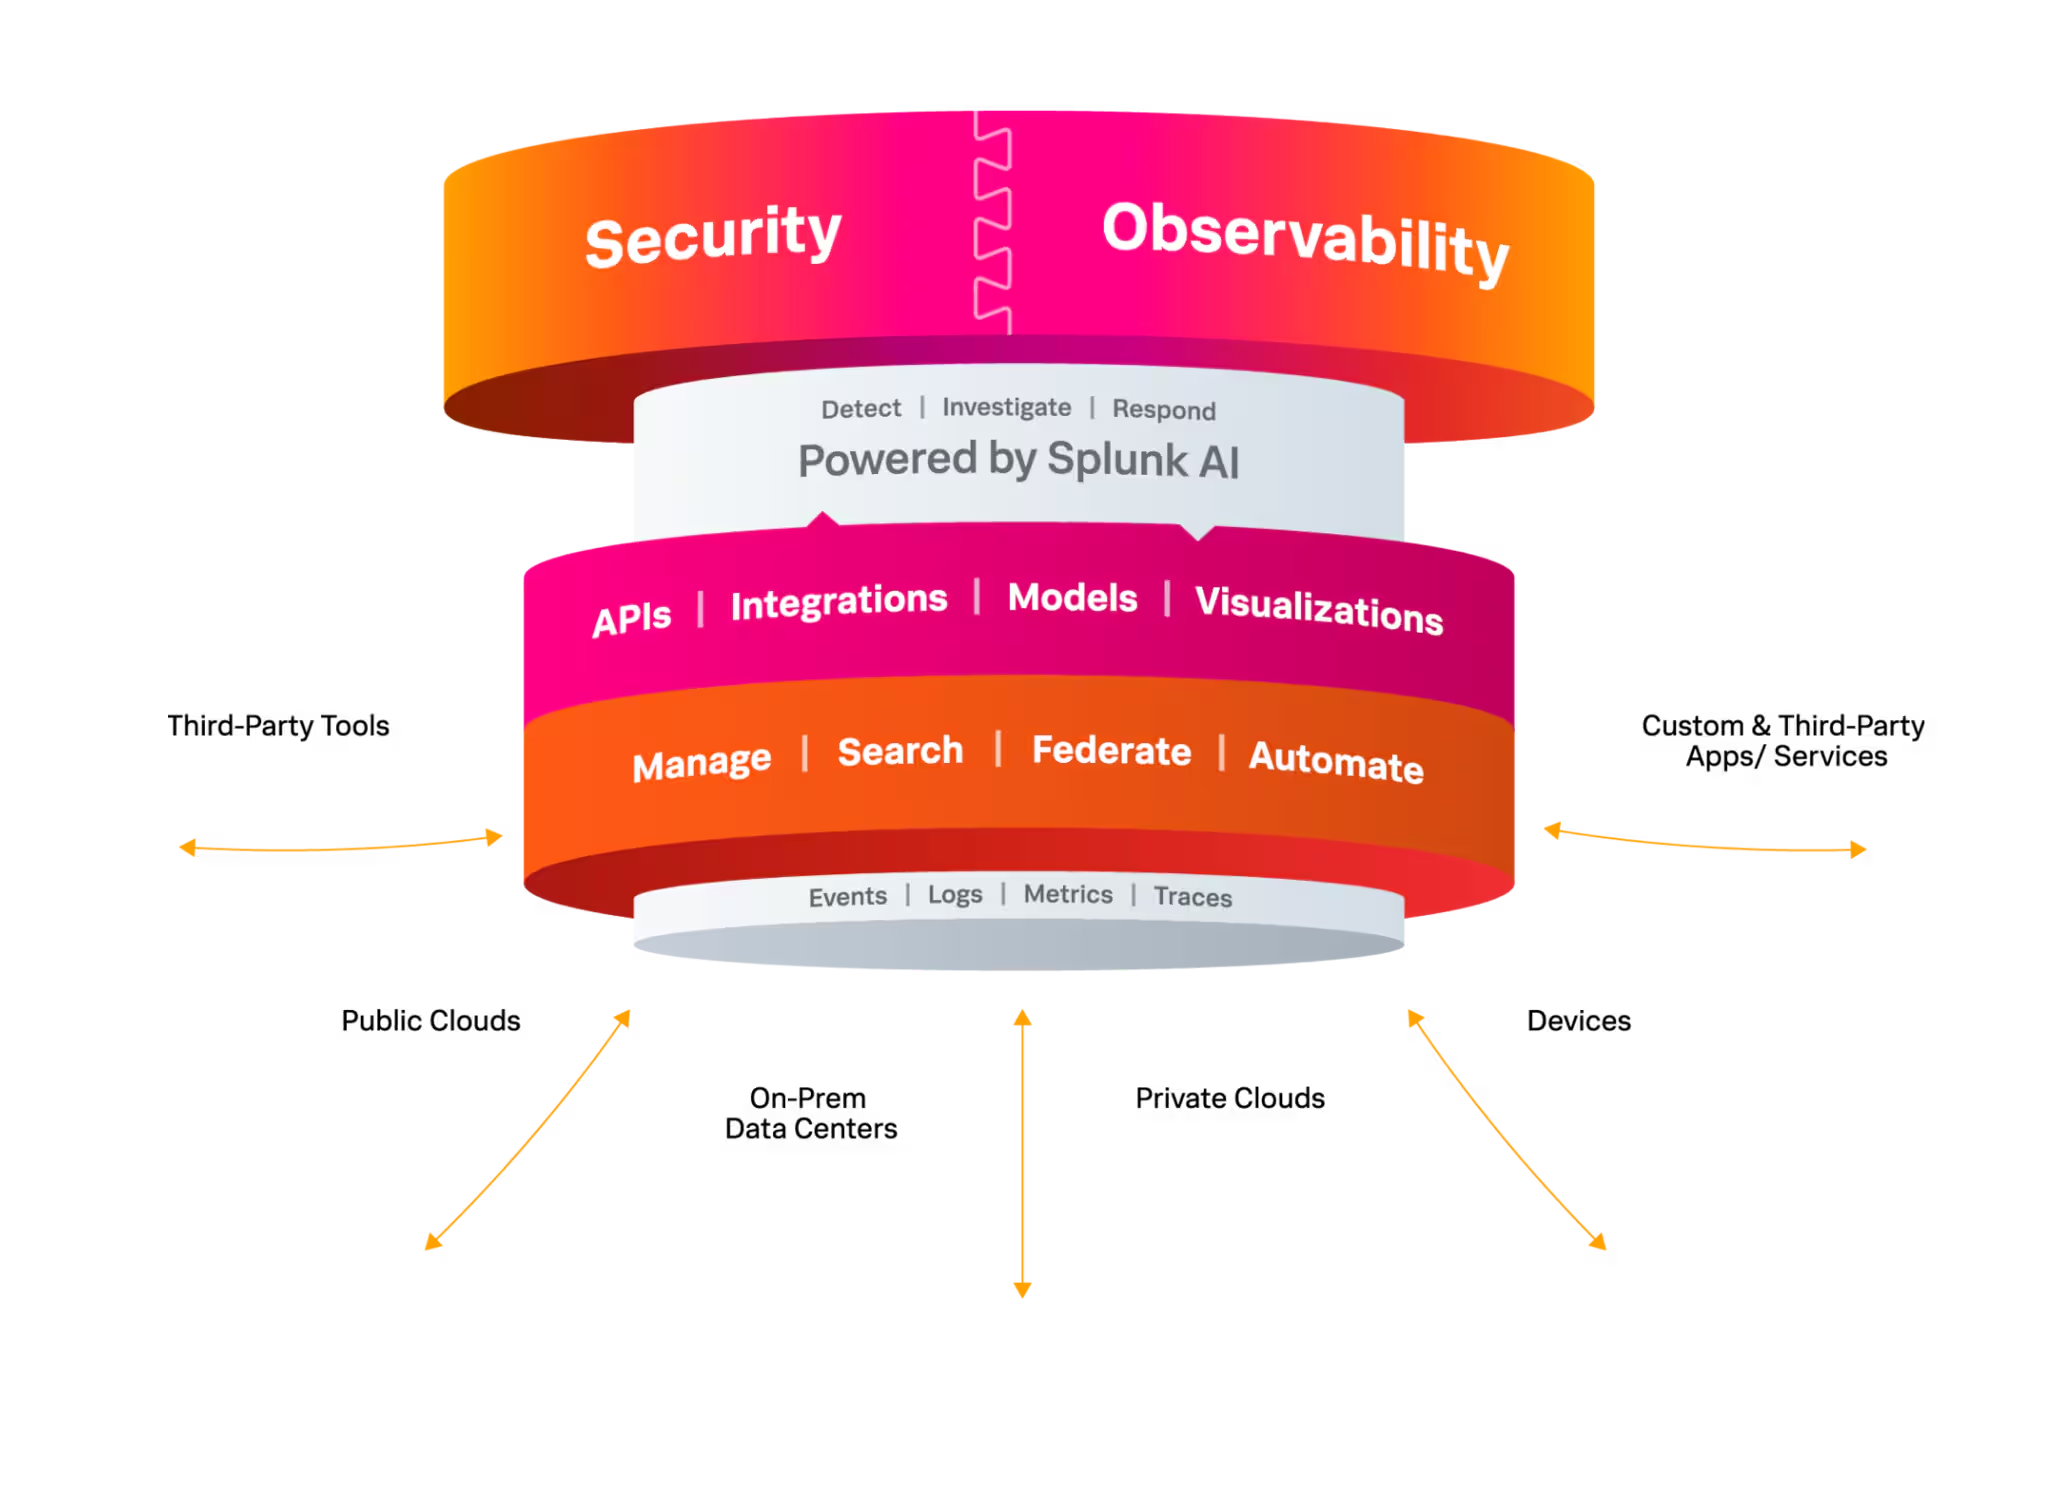 A 3D representation of Splunk's capabilities, including Security and Observability powered by Splunk AI, with integrations for APIs, models, and visualizations, and functions for managing, searching, federating, and automating data events, logs, metrics, and traces.